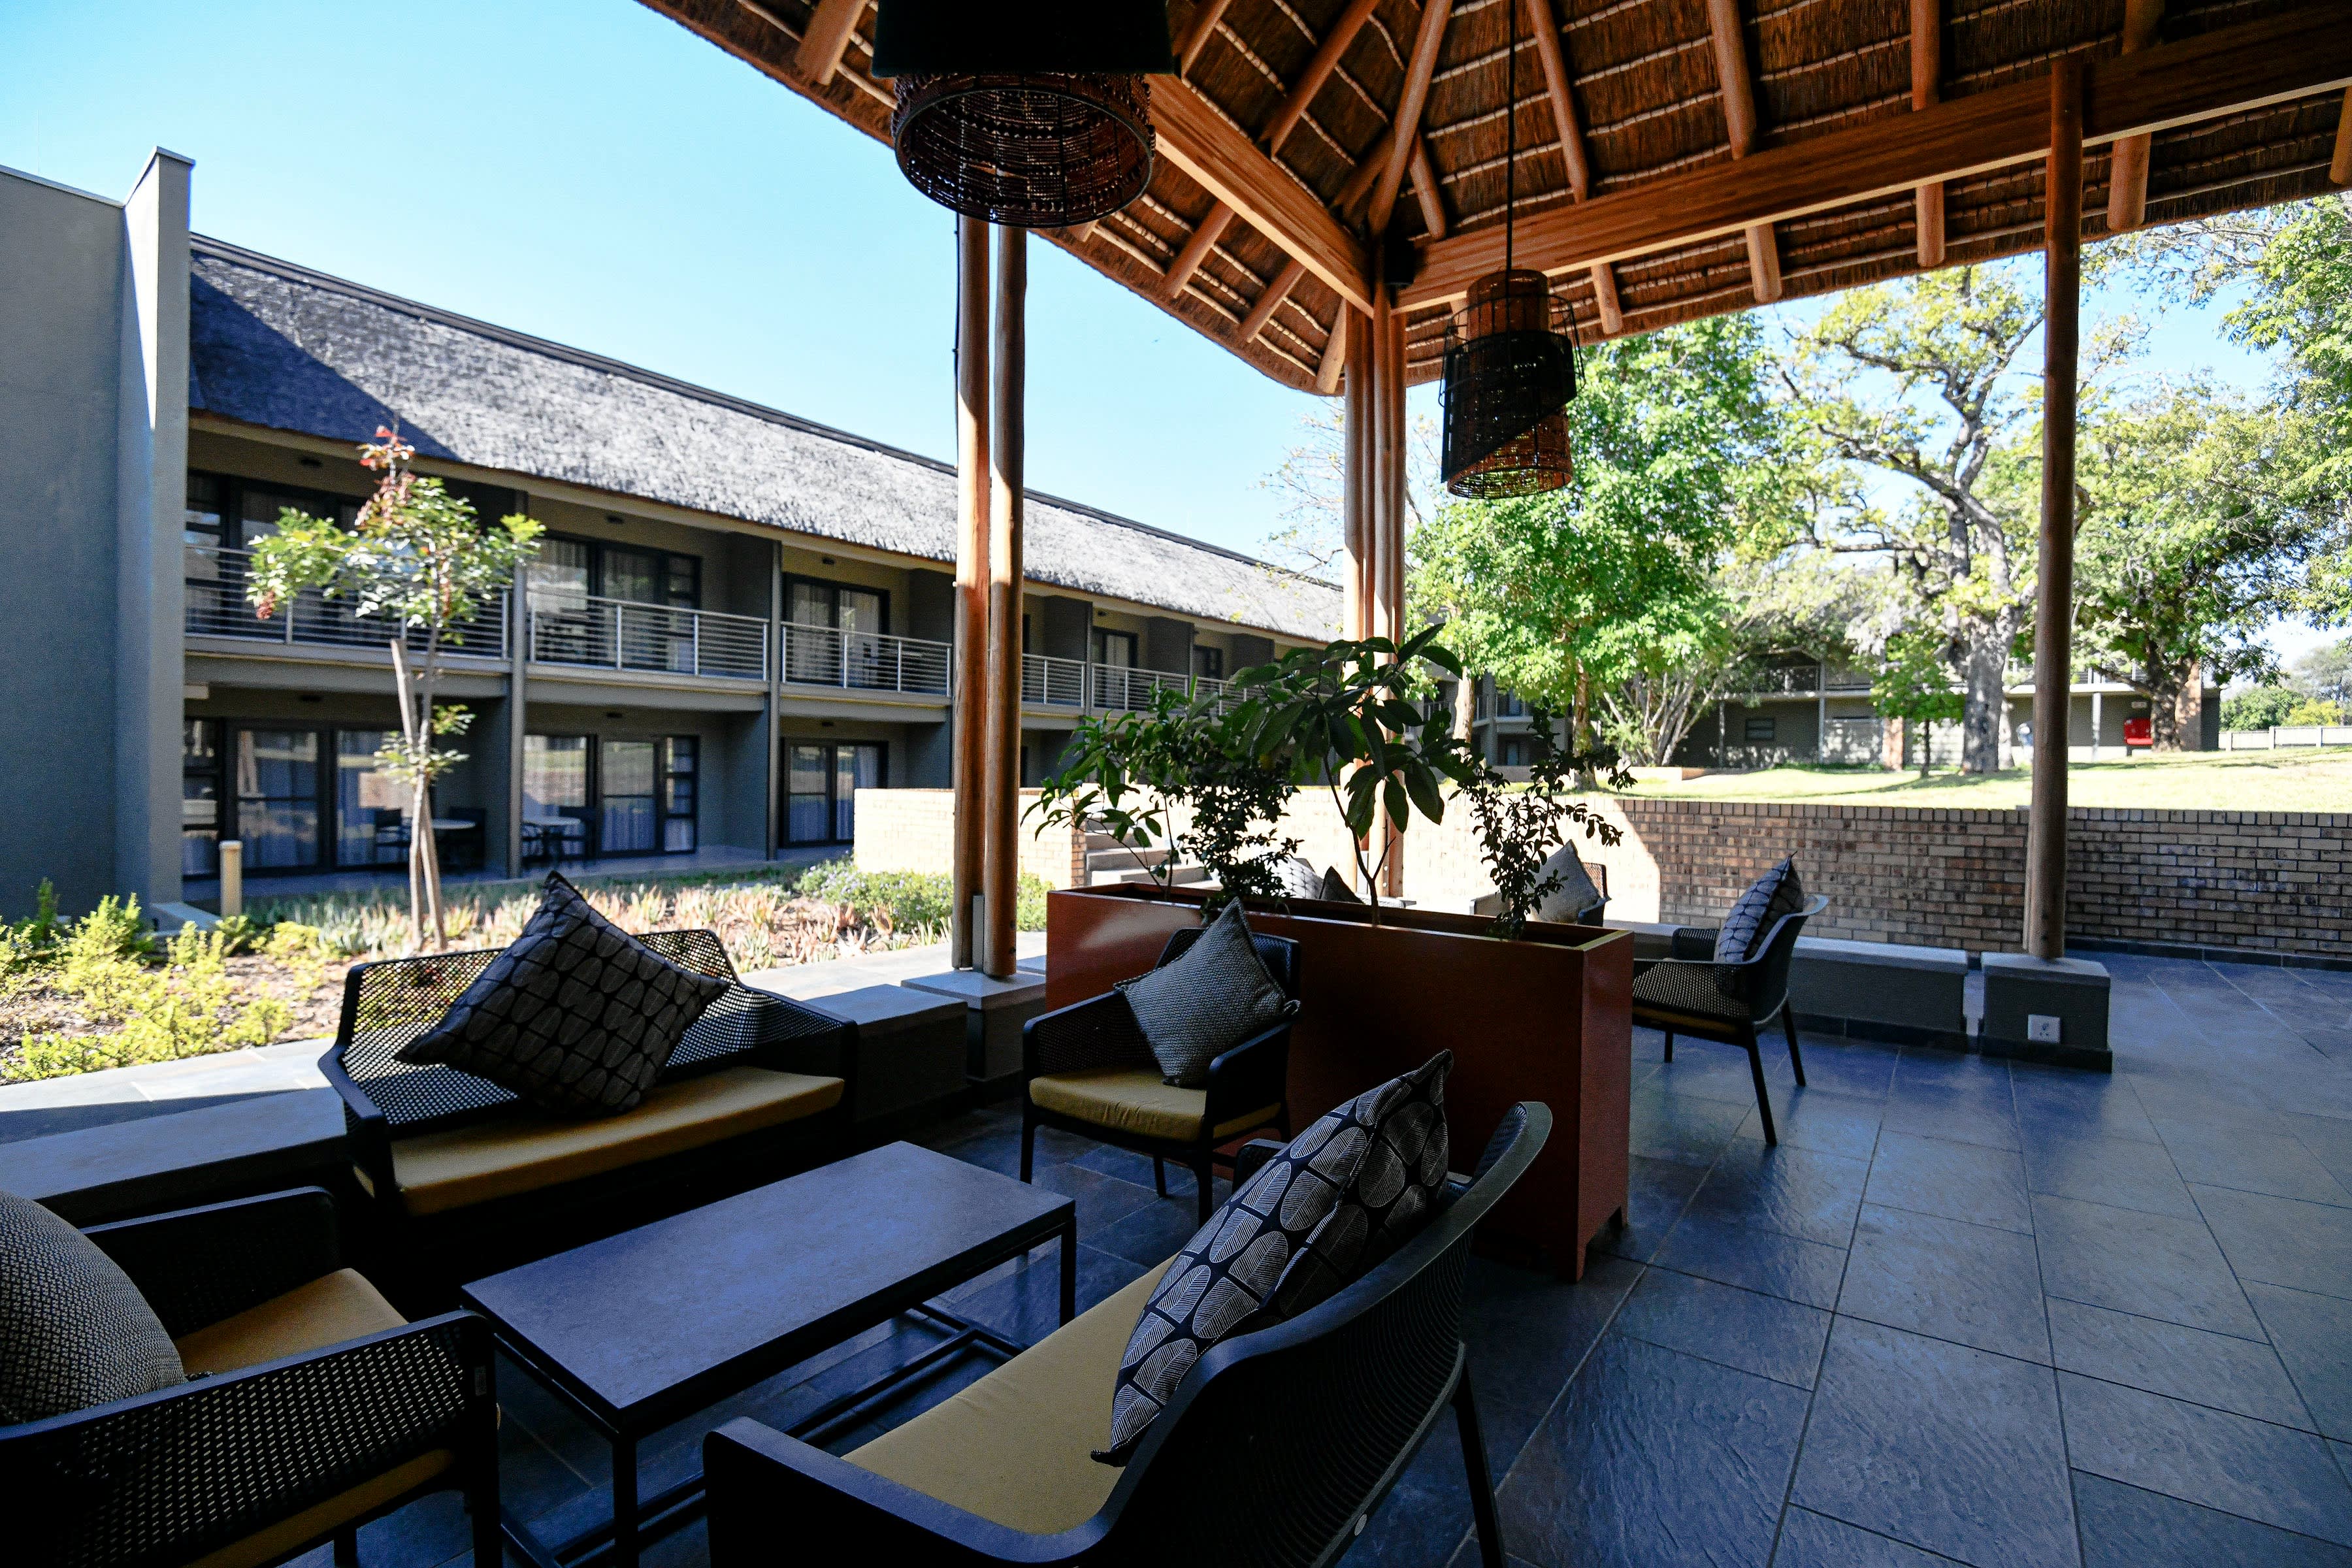 Skukuza Safari Lodge: KRUGER NATIONAL PARK- 1 Night stay for 2 Adults + Breakfast From R1 875 per person per night!